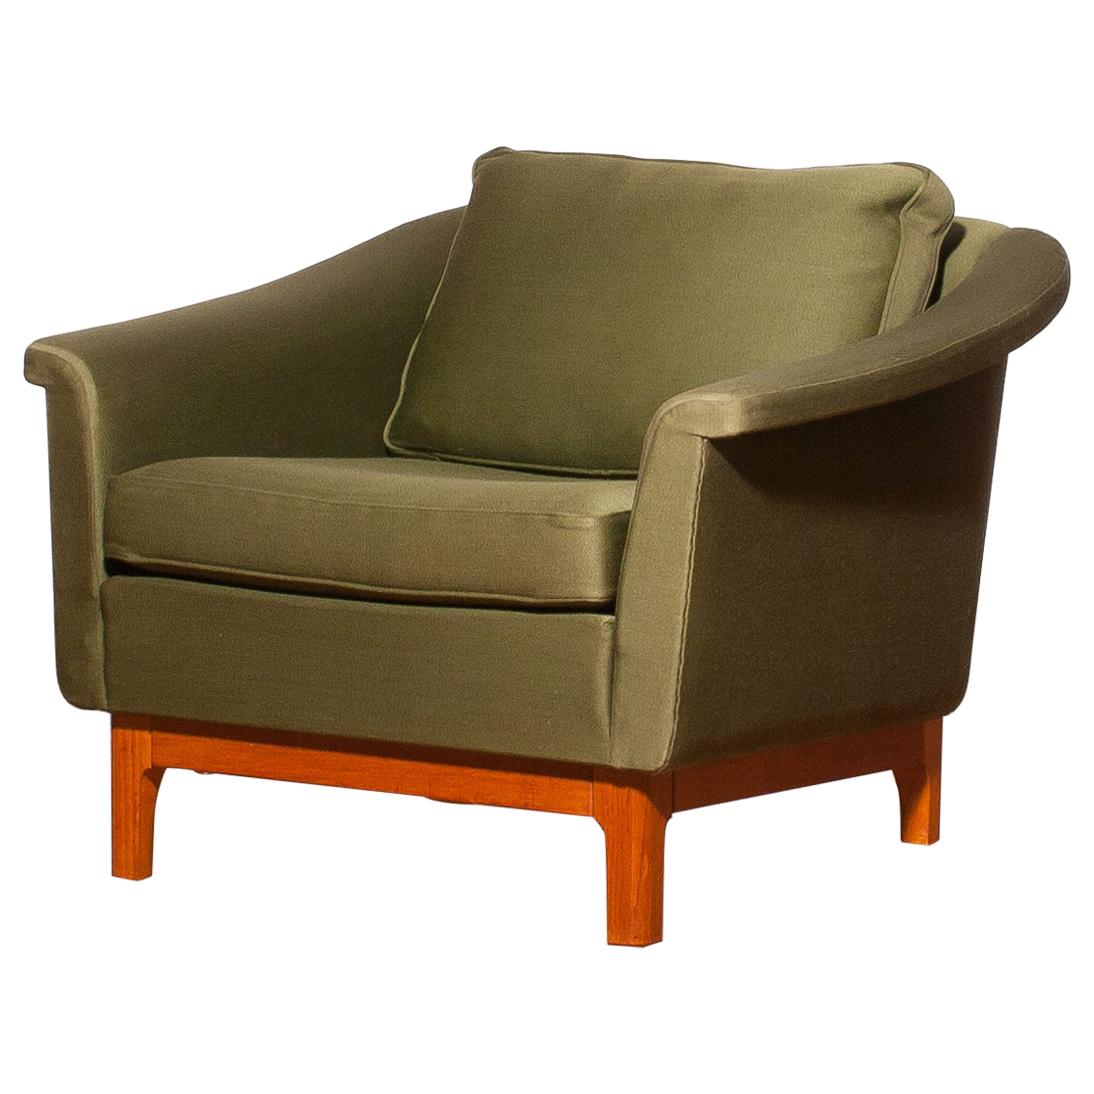 Beautiful lounge chair 'Pasadena' designed by Folke Ohlsson
and produced by DUX Ljungs Industrier, Sweden.
It is a very solid chair with a green upholstery
and teak frame.
The chair is in good condition.
Period: 1960s.
Dimensions: H 65 cm, W